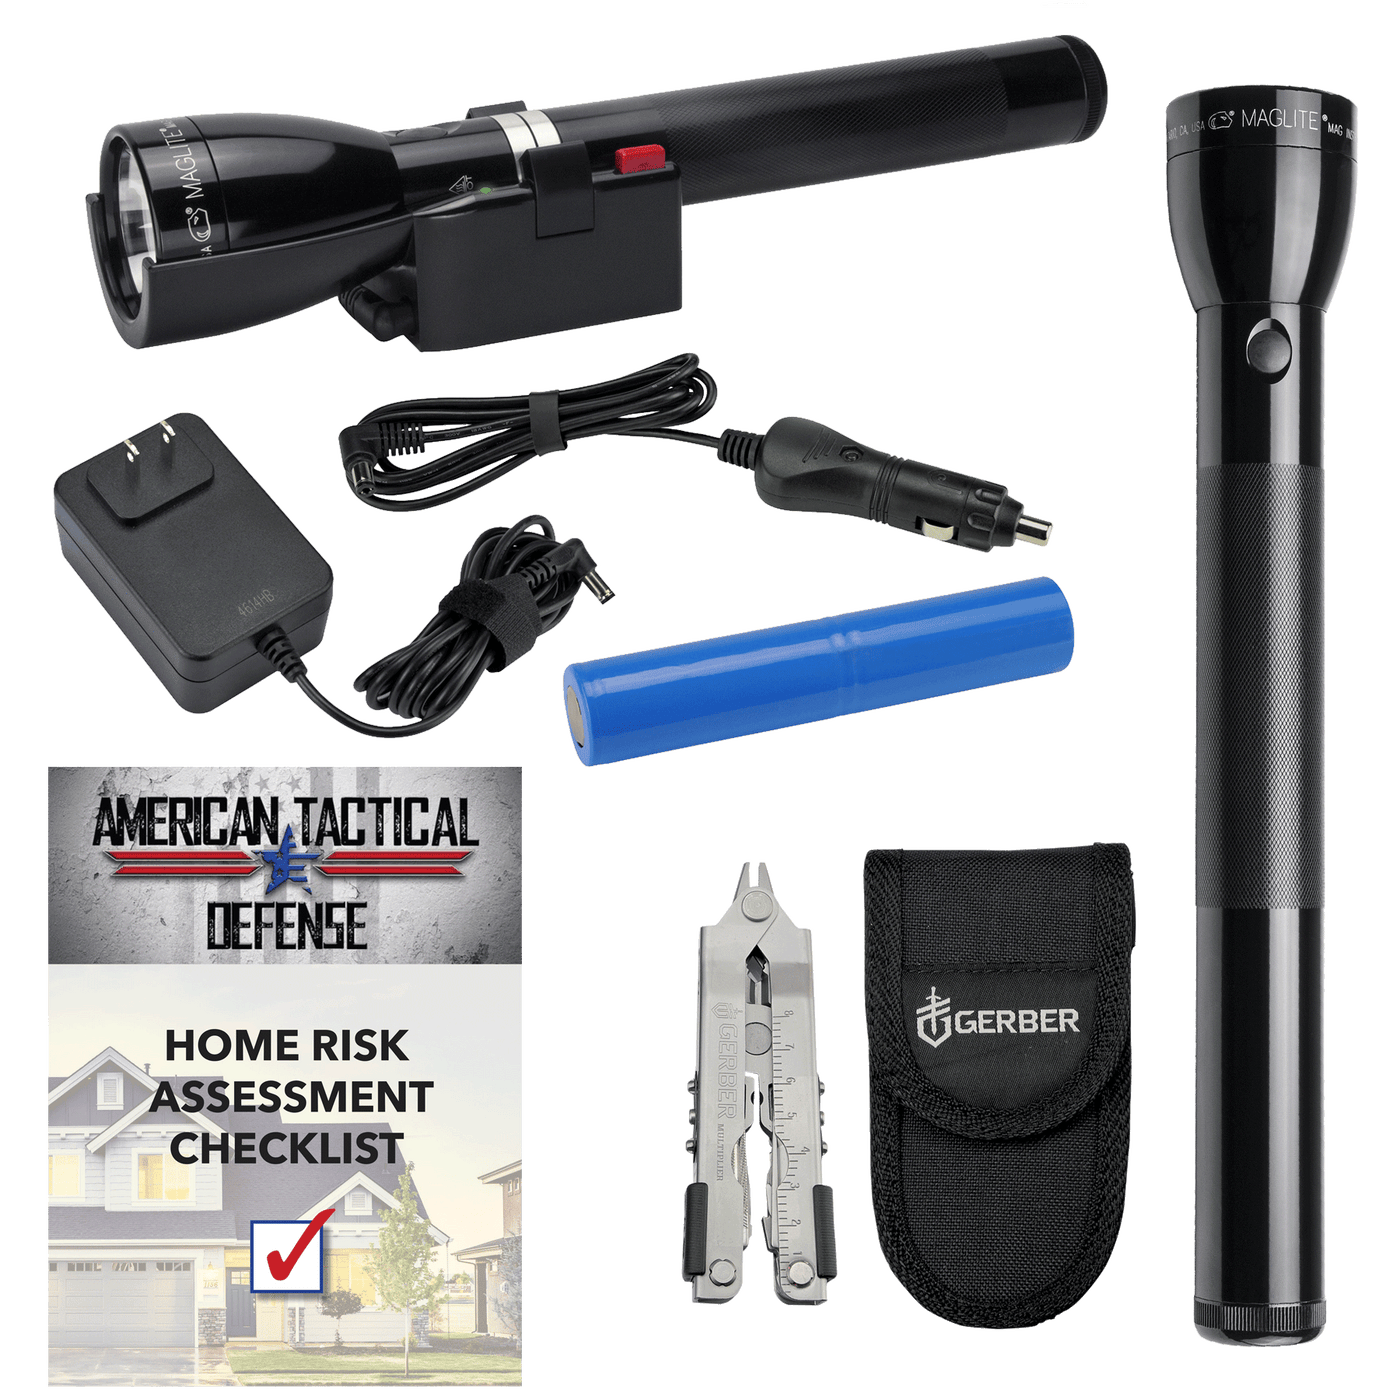 One black Maglite ML150LR LED Rechargeable Flashlight. System includes: charging cradle, 120V wall converter (home), and 12v DC adapter (auto), a Maglite ML300L 4 D-Cell LED Flashlight, A Gerber Multi-Tool with carrying case, and a Home Risk Assessment Checklist.  The bundle also includes a free Home Risk Assessment Checklist published by American Tactical Defense. 